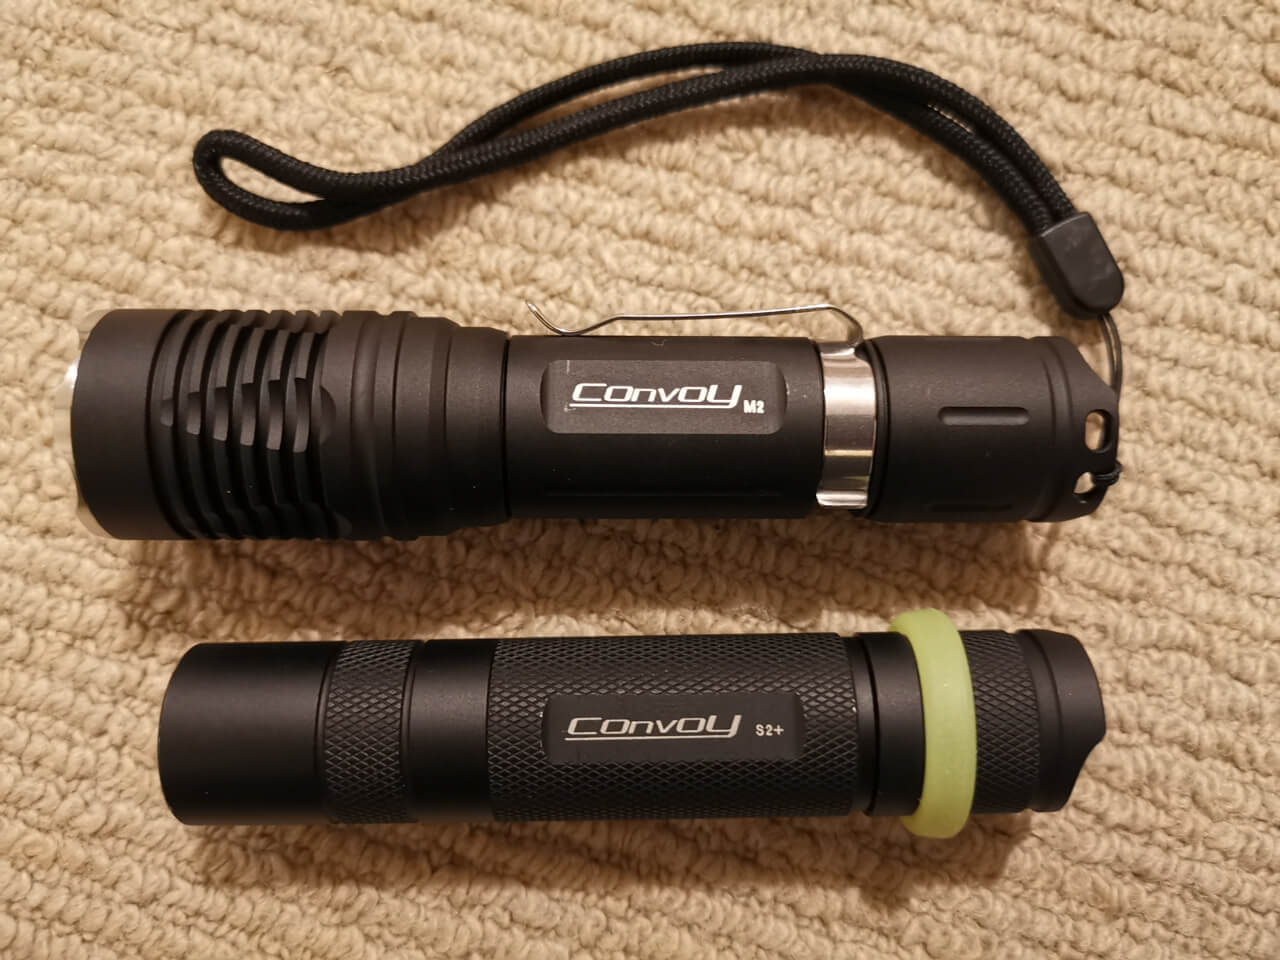 Convoy M2 and S2+